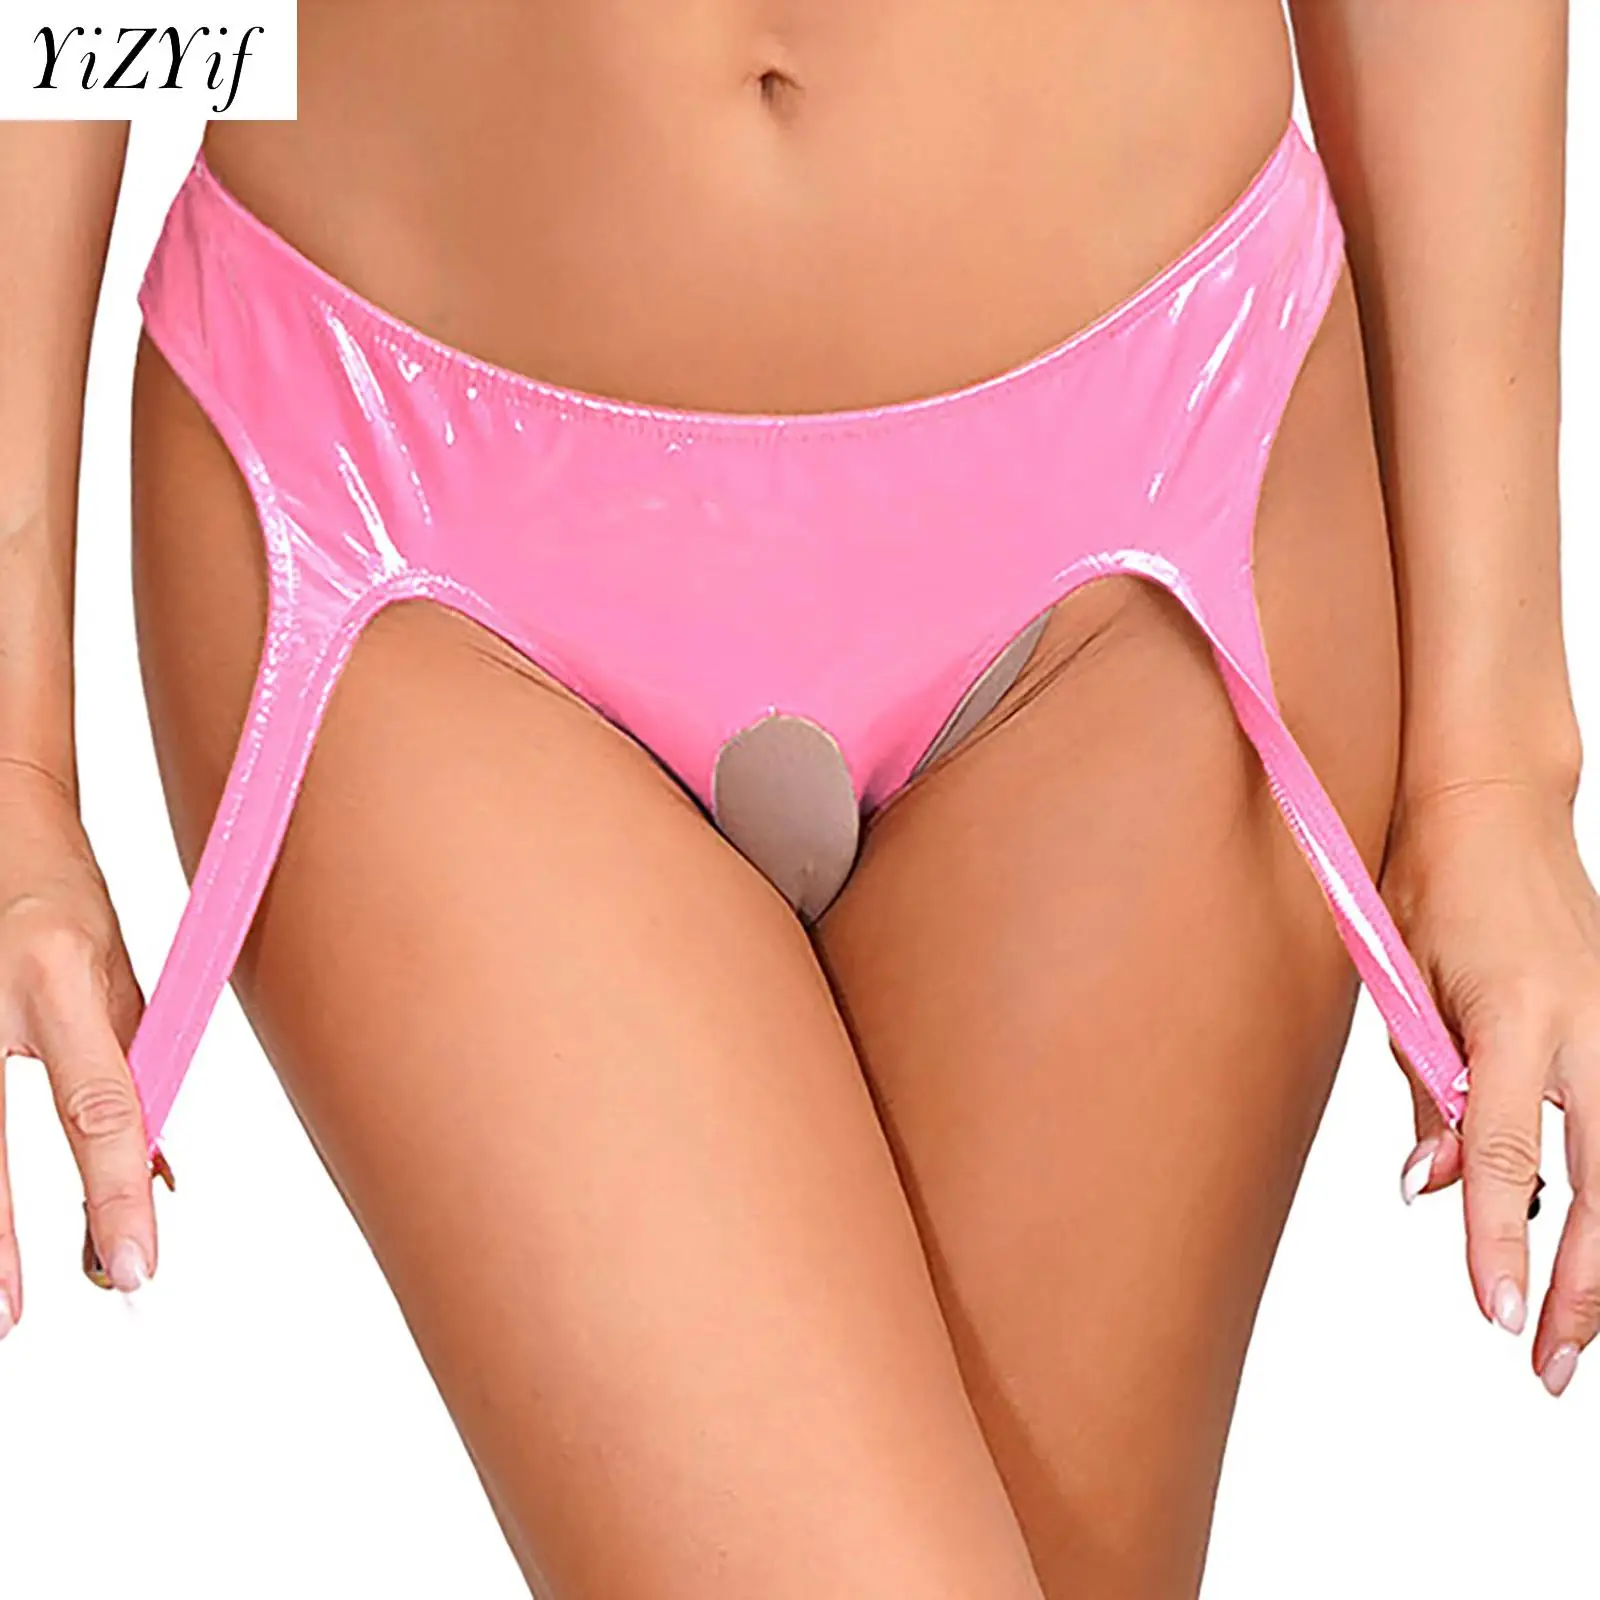 

Sexy Crotchless Underwear with Garter Clips Women Wet Look Patent Leather Open Butt Briefs Panties Lingerie Open Crotch Thongs